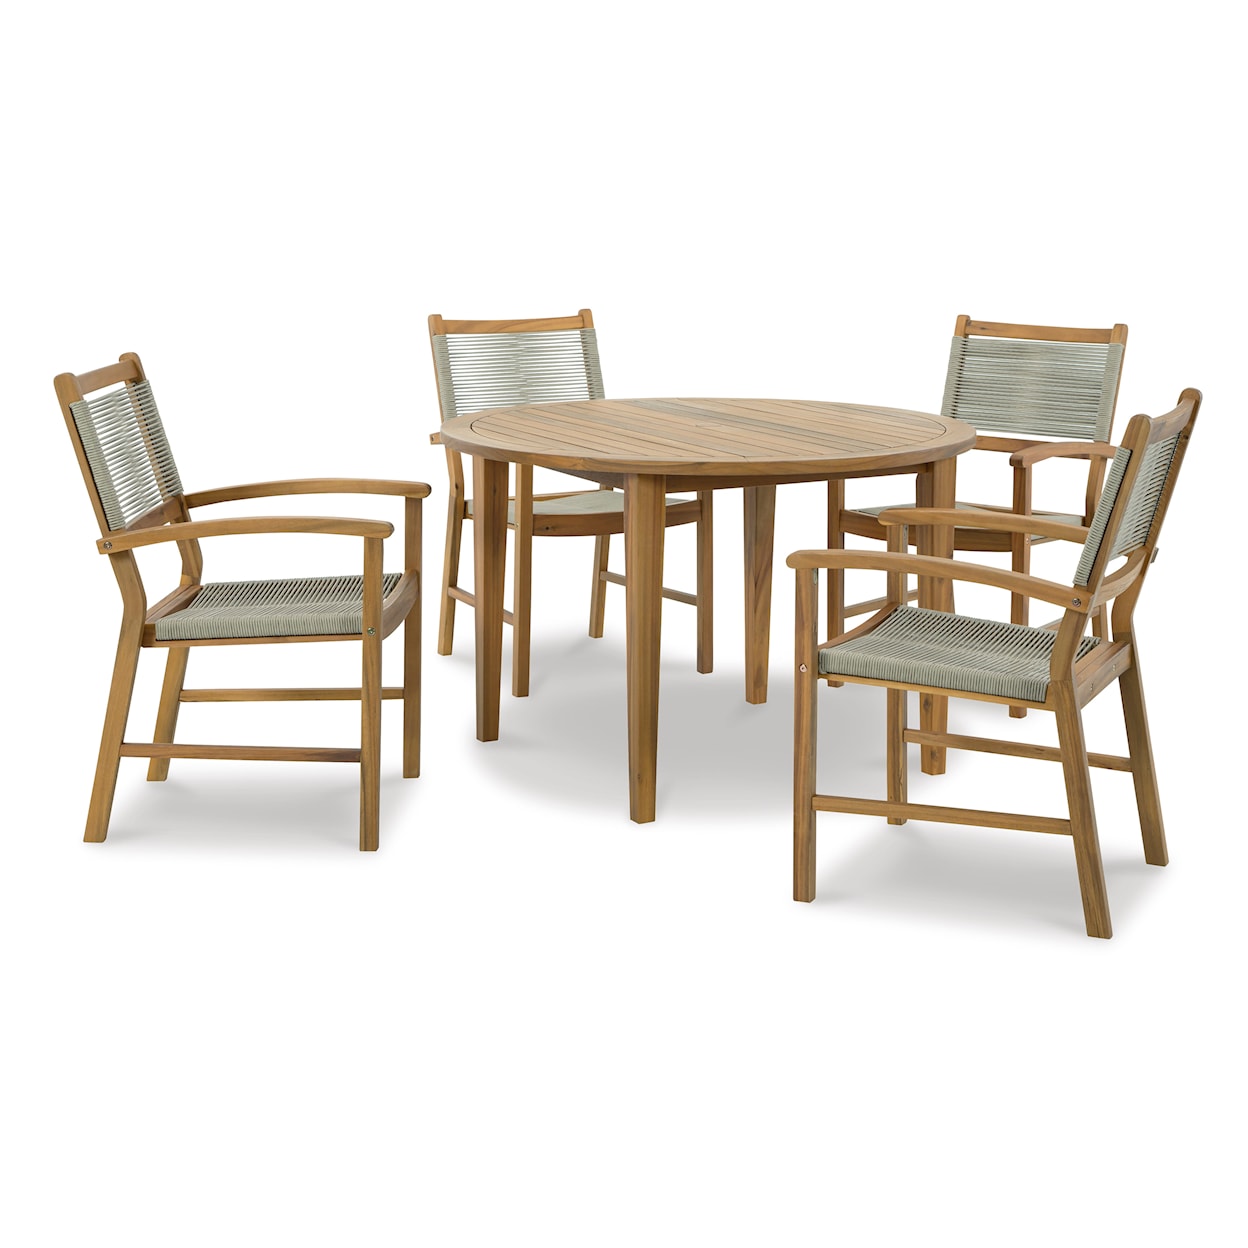 Signature Design by Ashley Janiyah 5-Piece Outdoor Dining Set